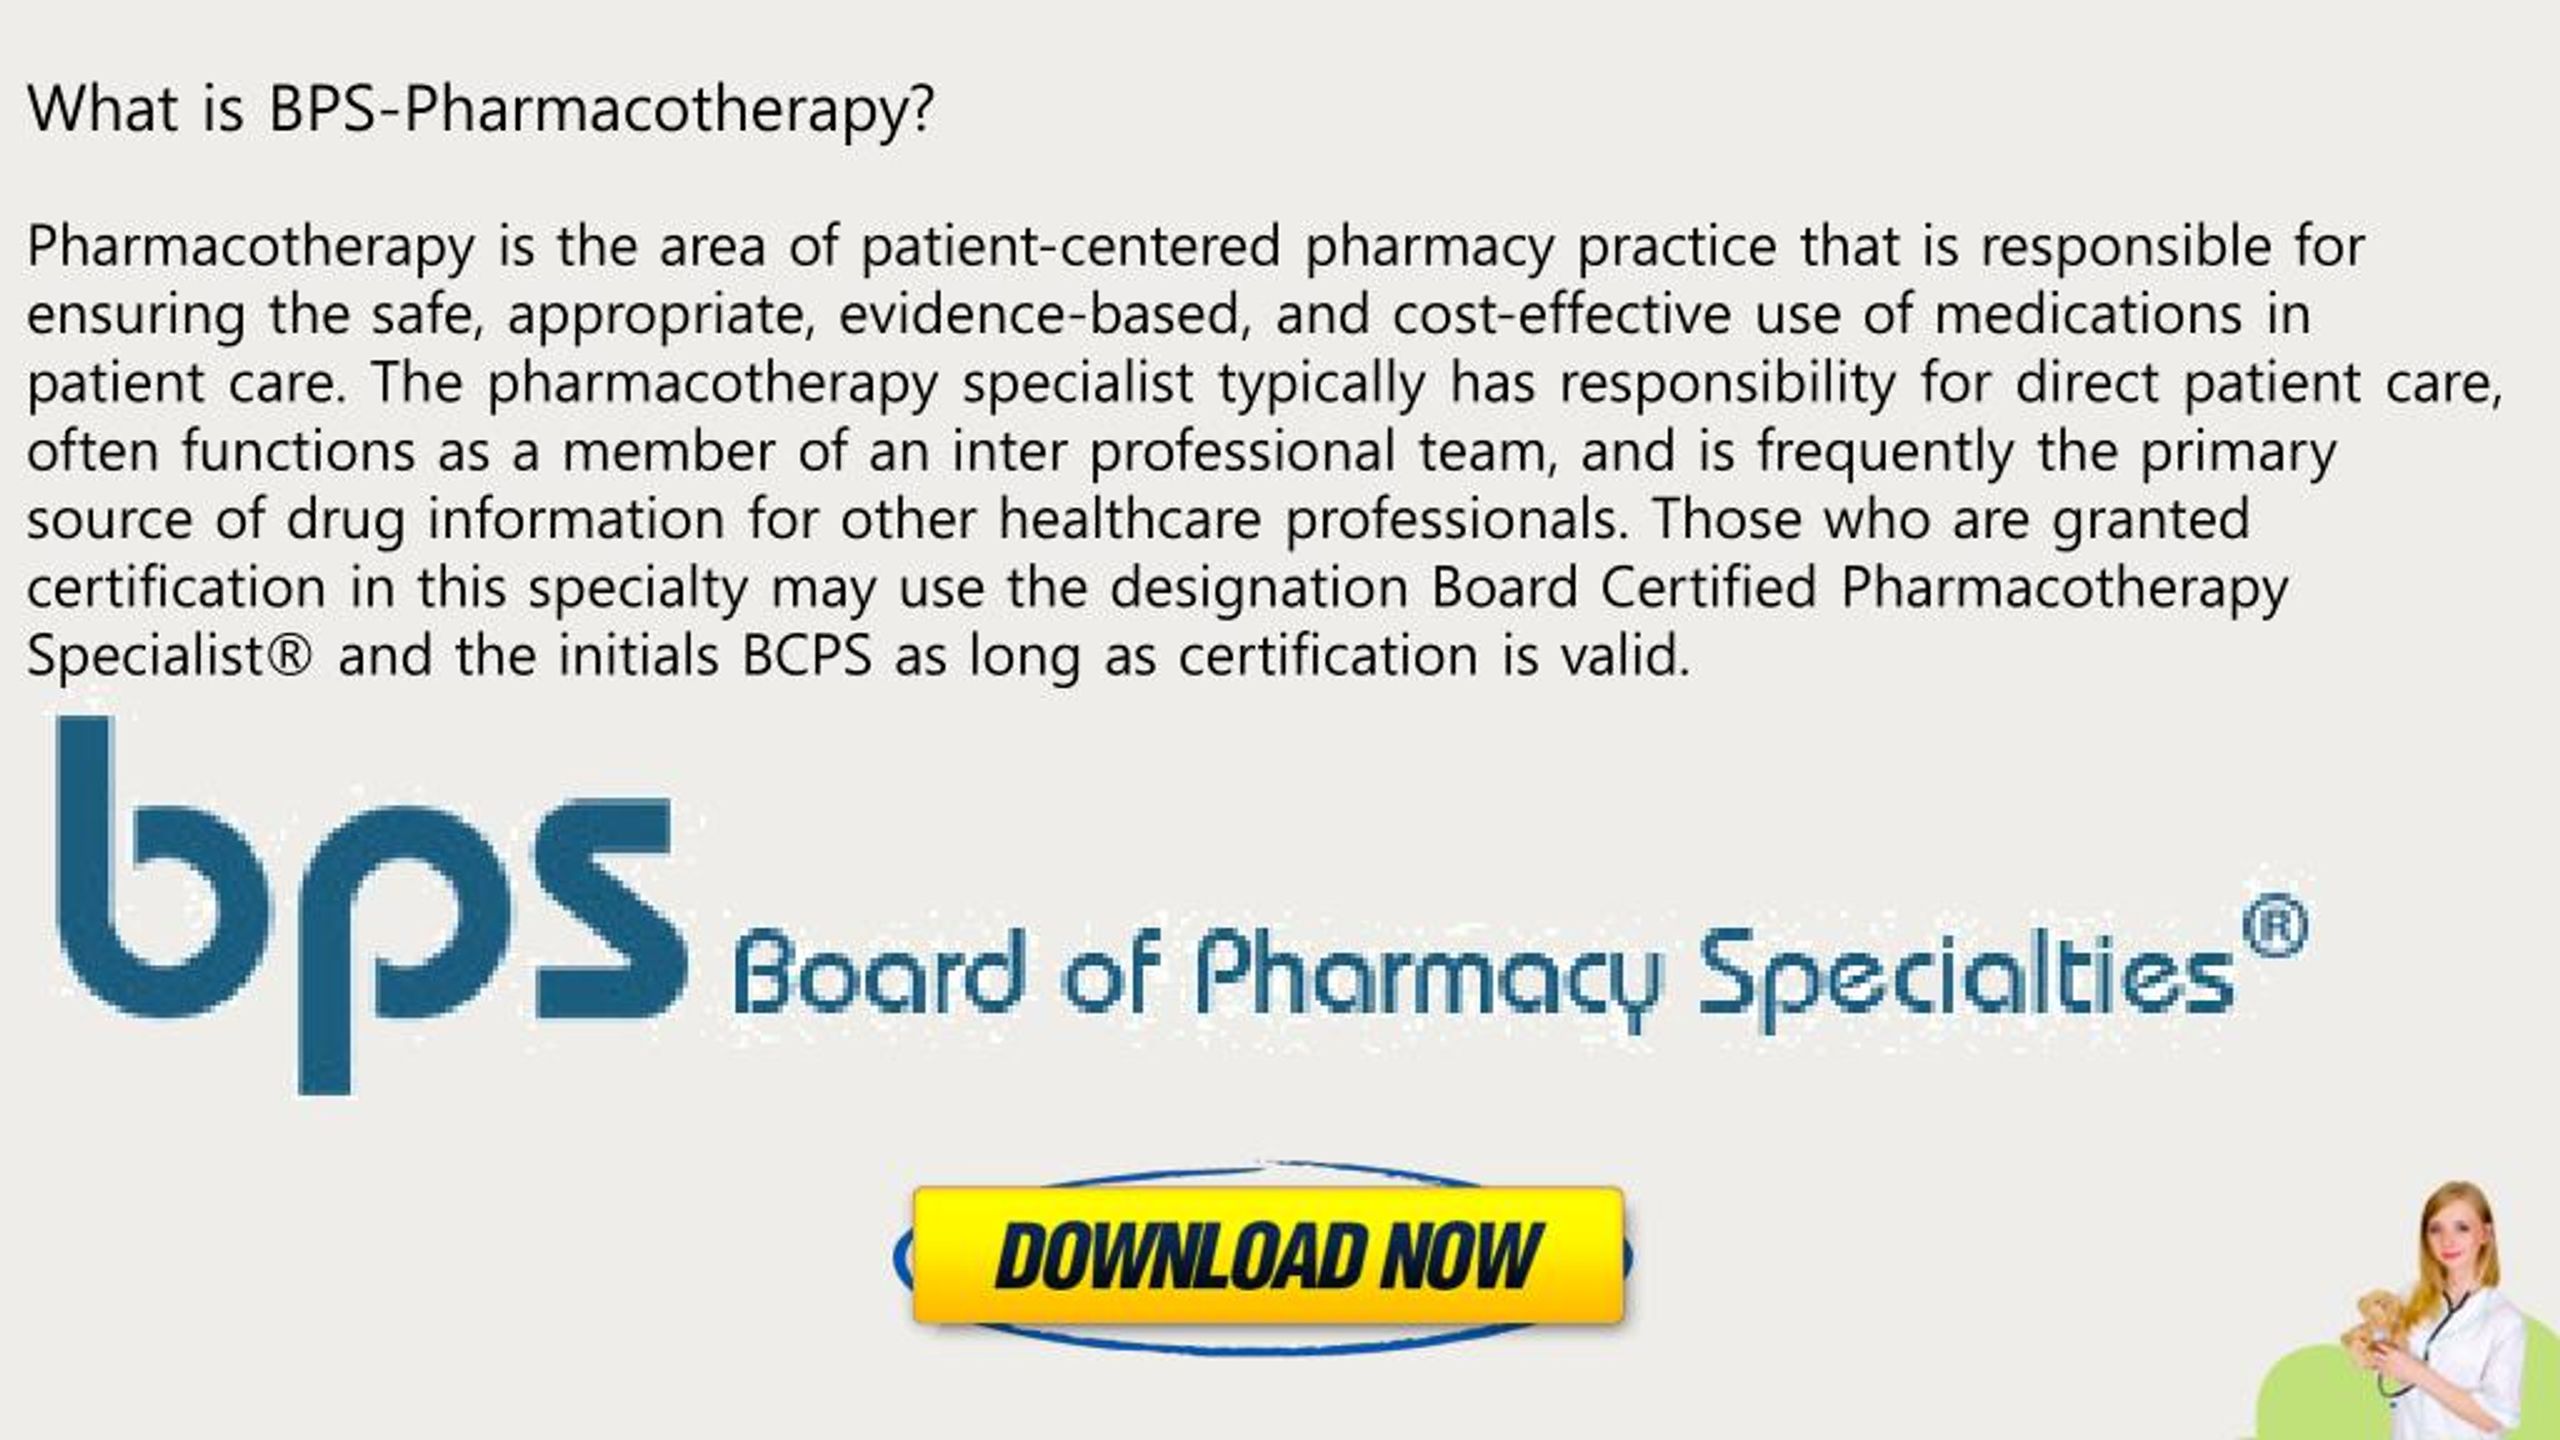 BPS-Pharmacotherapy Study Materials Review